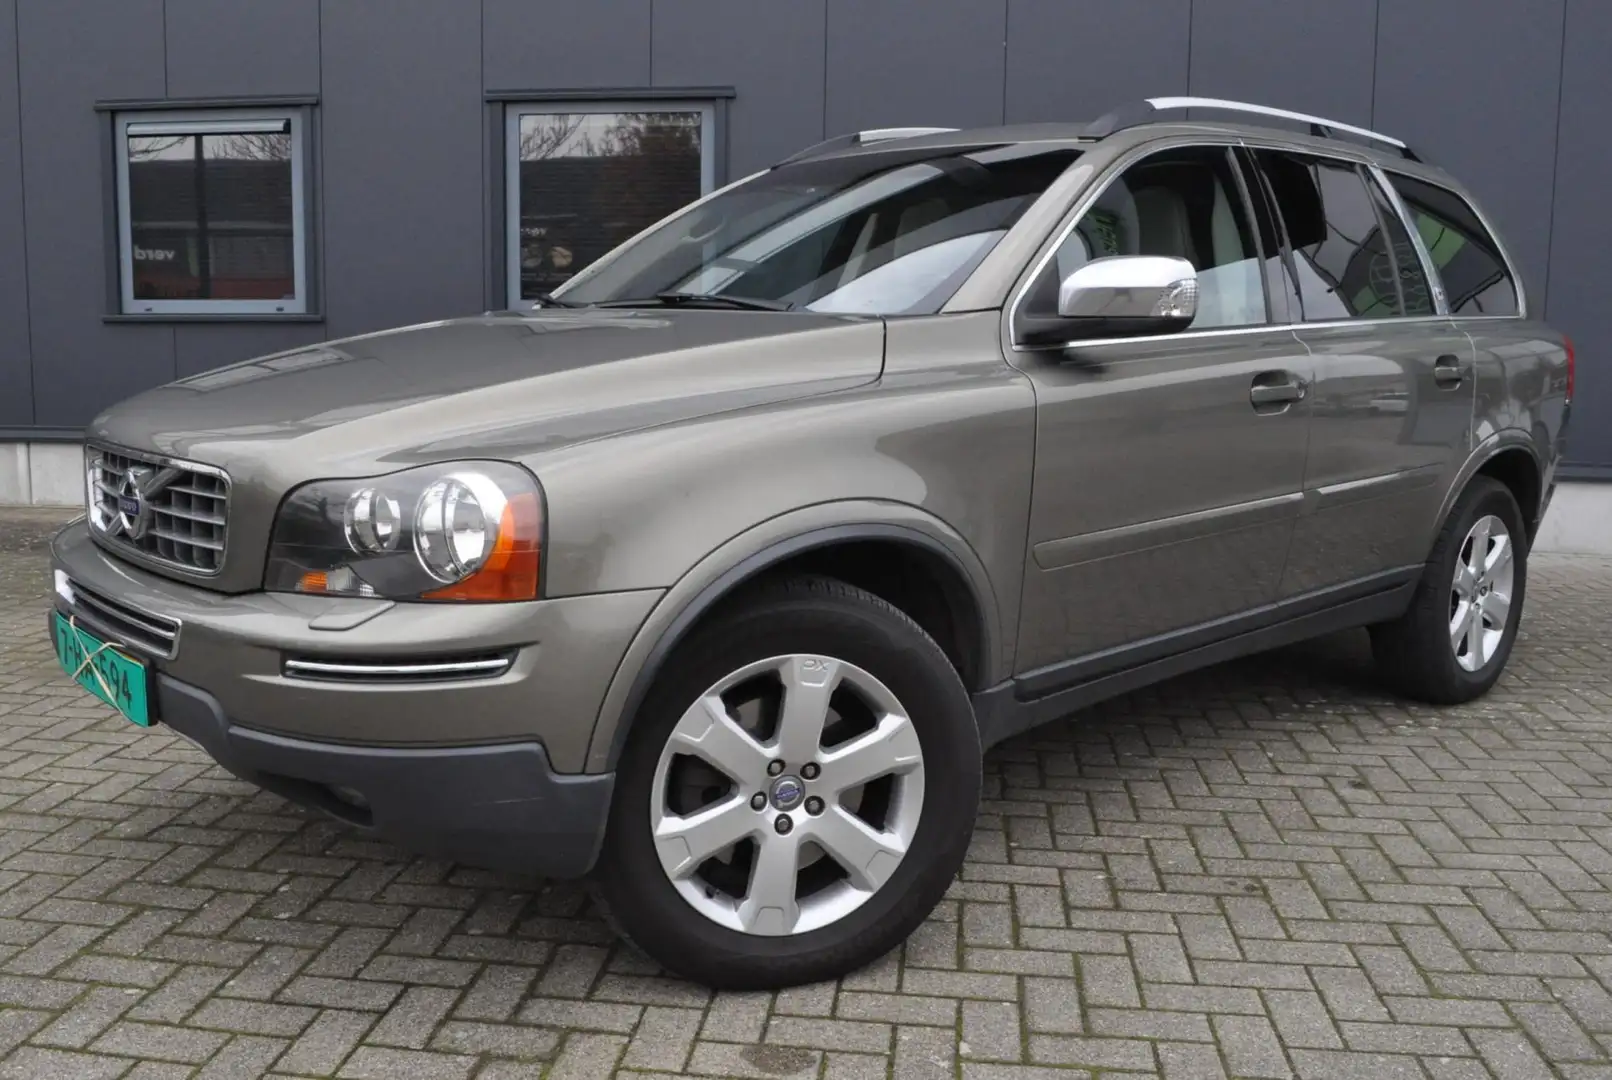 Volvo XC90 4.4 V8 Executive Edition, 188.000km, alle opties, Green - 2